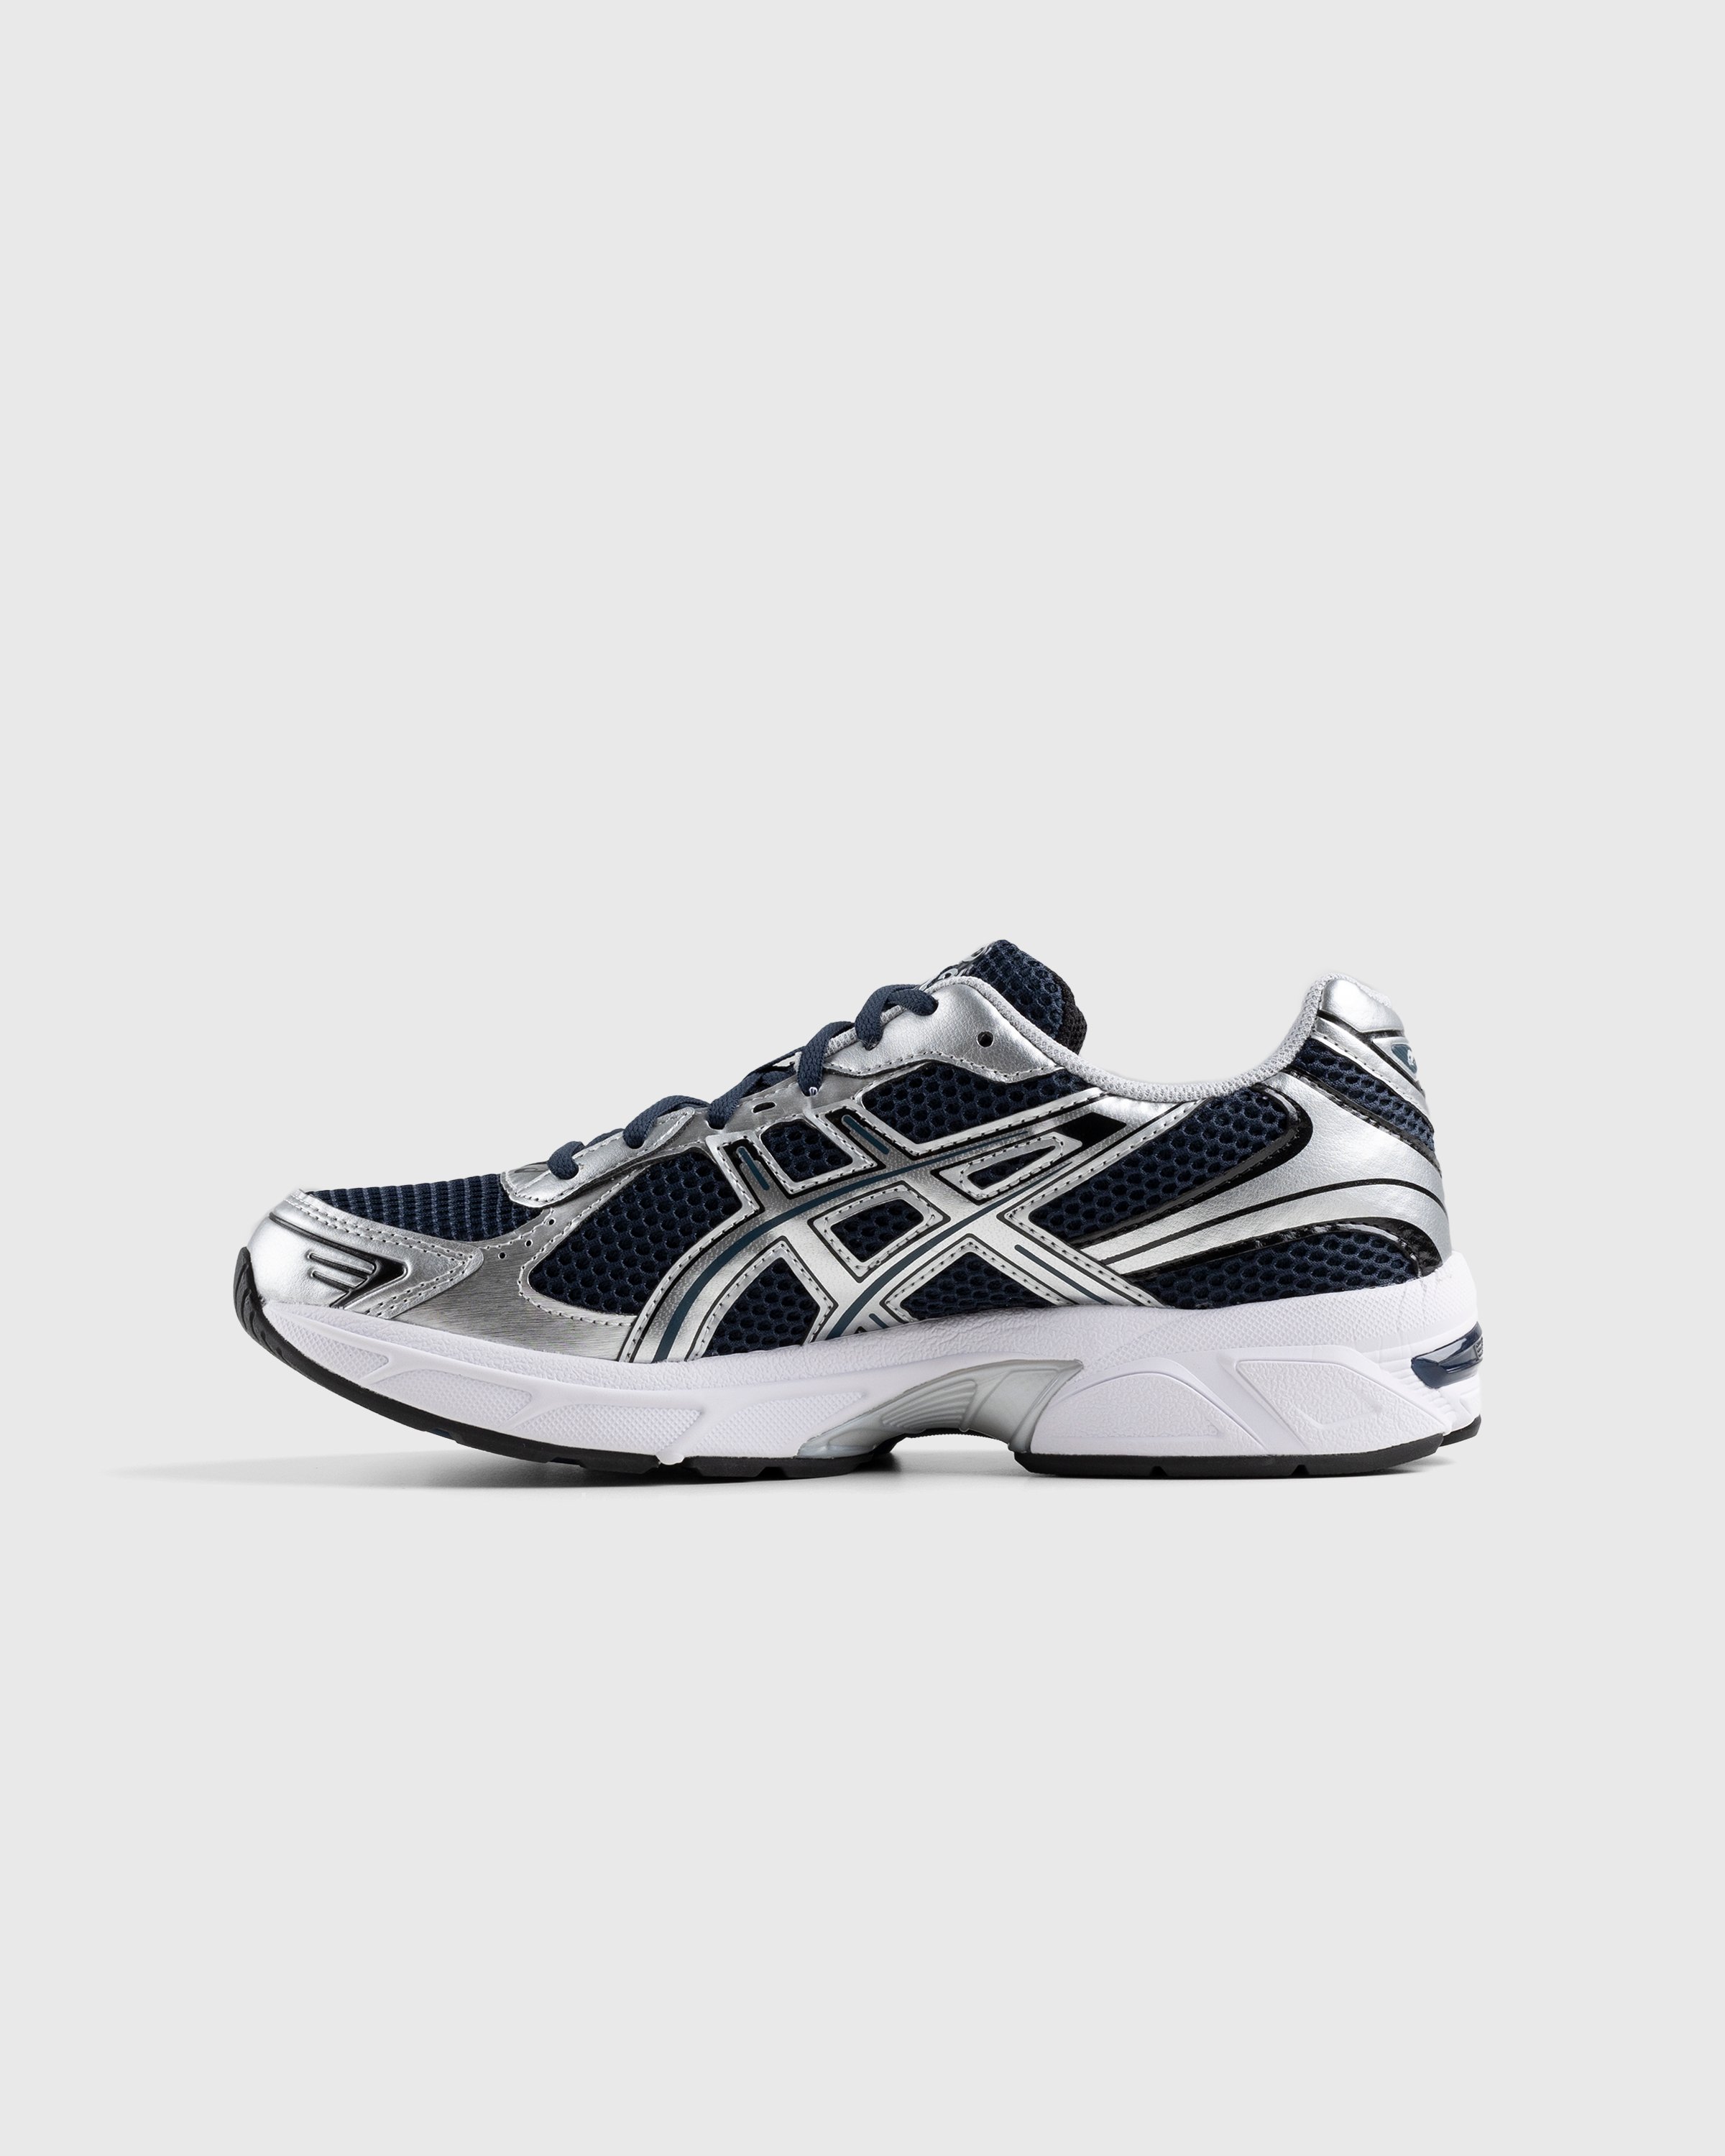 asics - GEL-1130 French Blue/Pure Silver - Footwear - Blue - Image 2